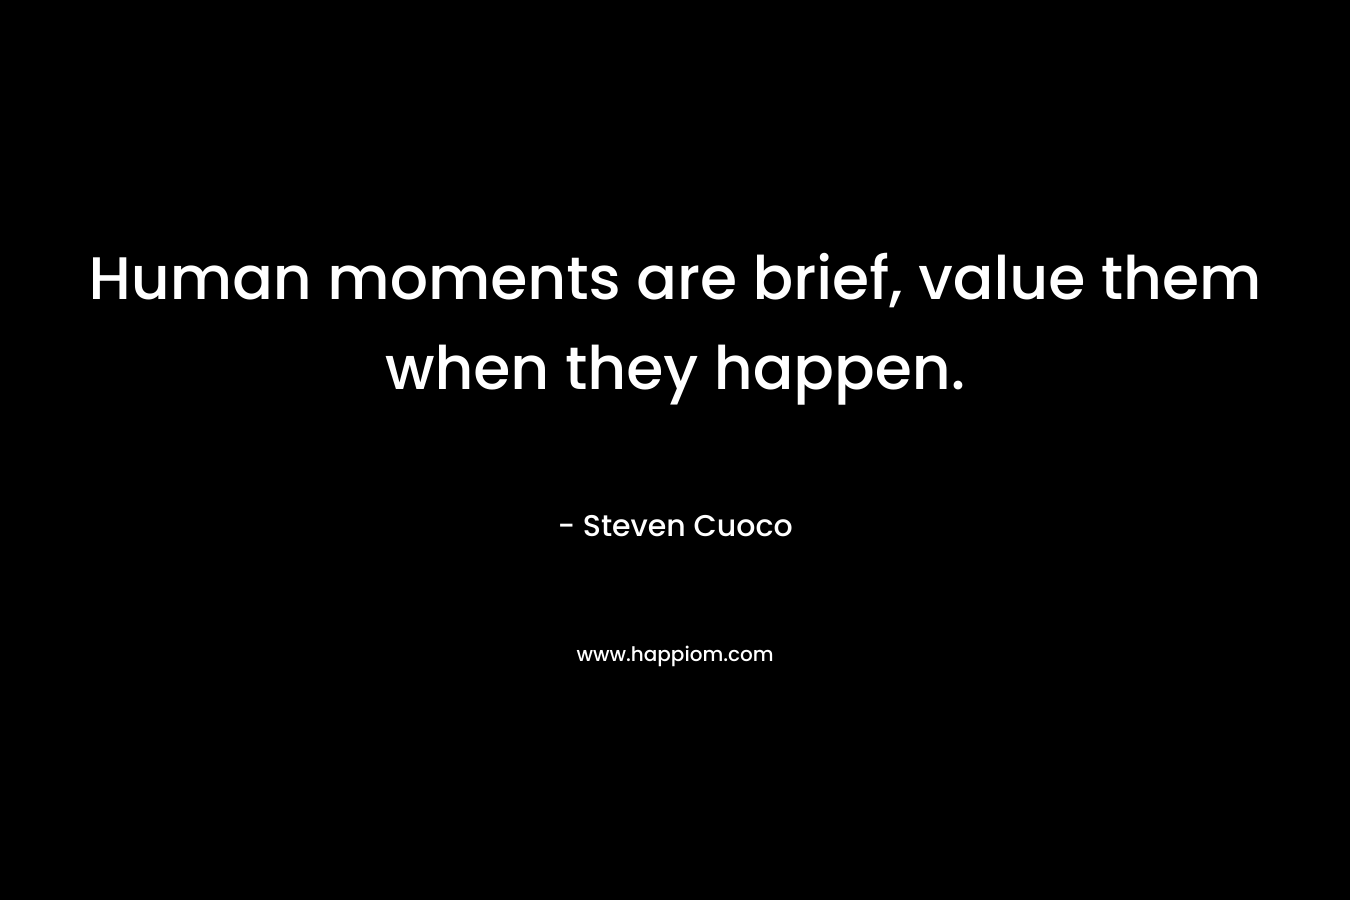 Human moments are brief, value them when they happen.